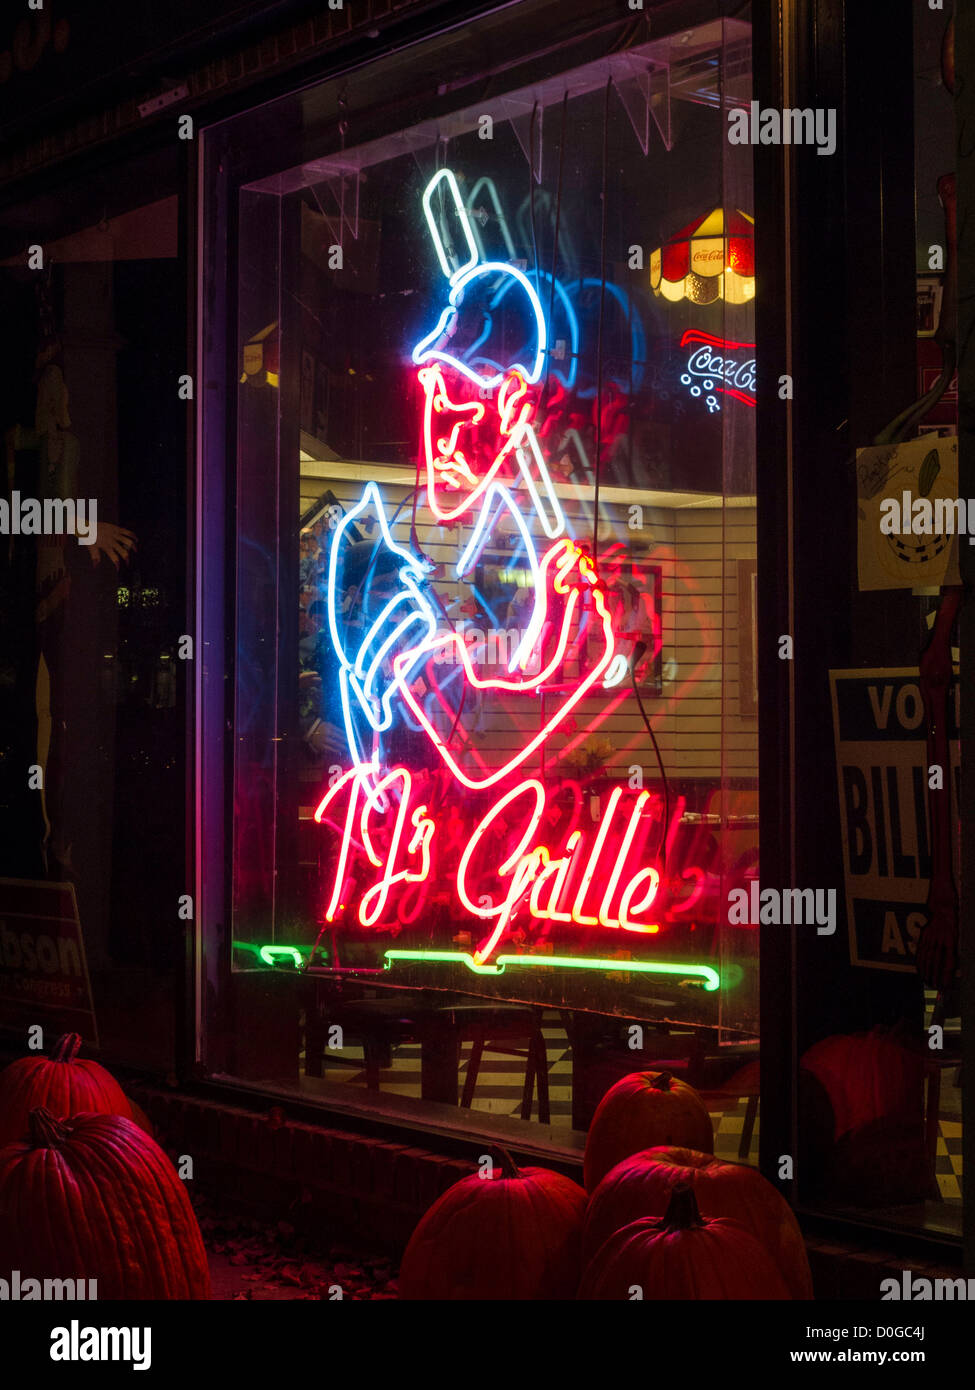 Baseball Batter Neon, TJ's Grill Window at Night, Main Street, Cooperstown, New York, USA Stock Photo